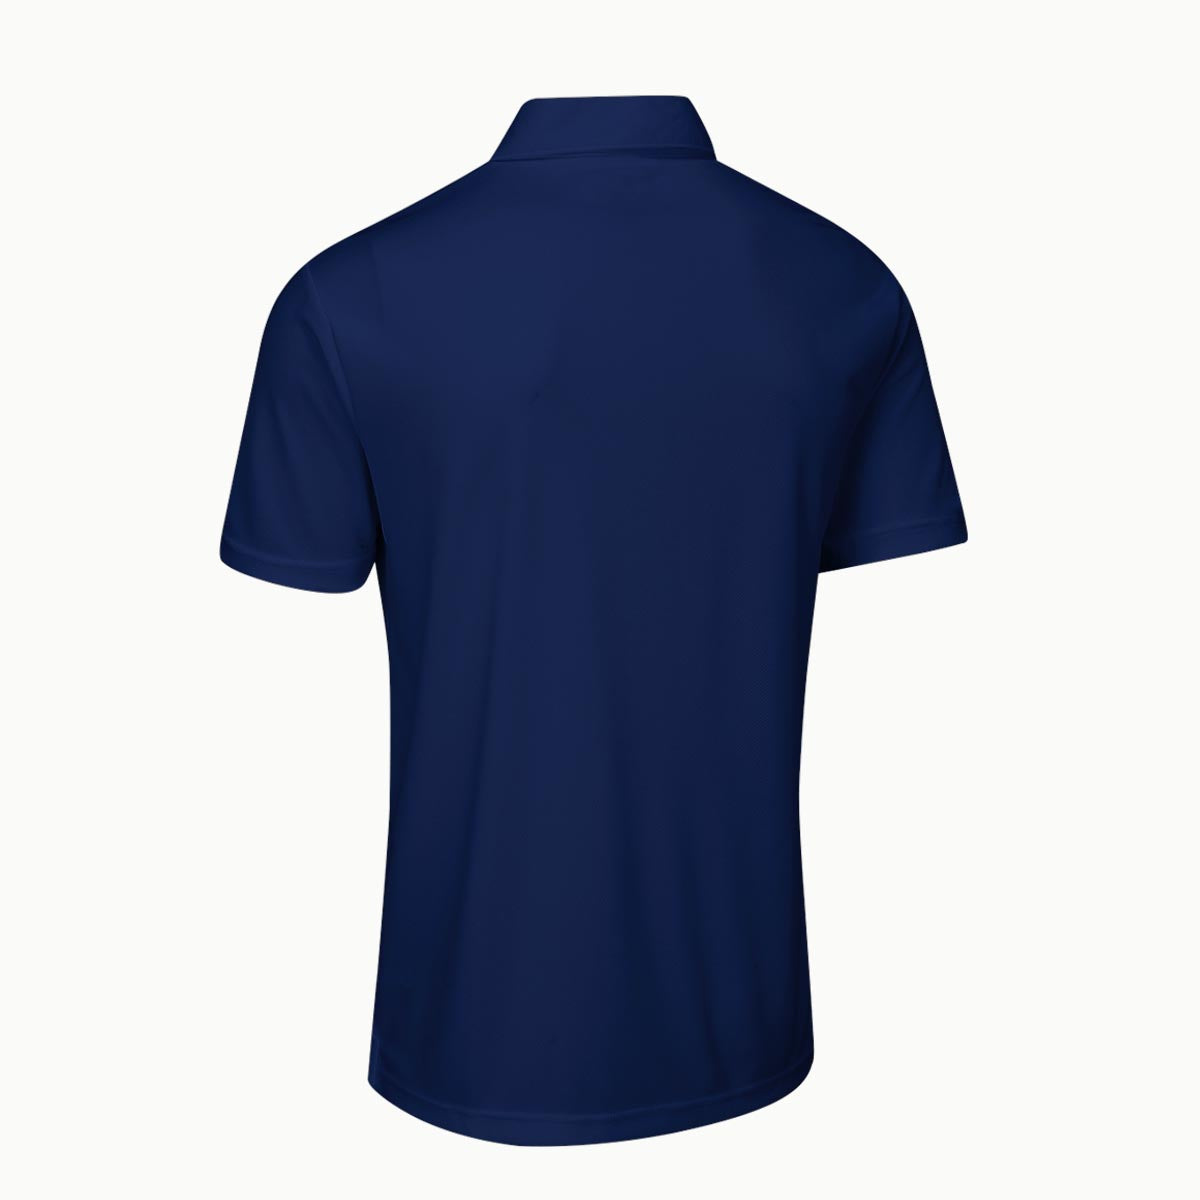 Download Solid Navy Blue | Polo T-Shirt - 100kmph